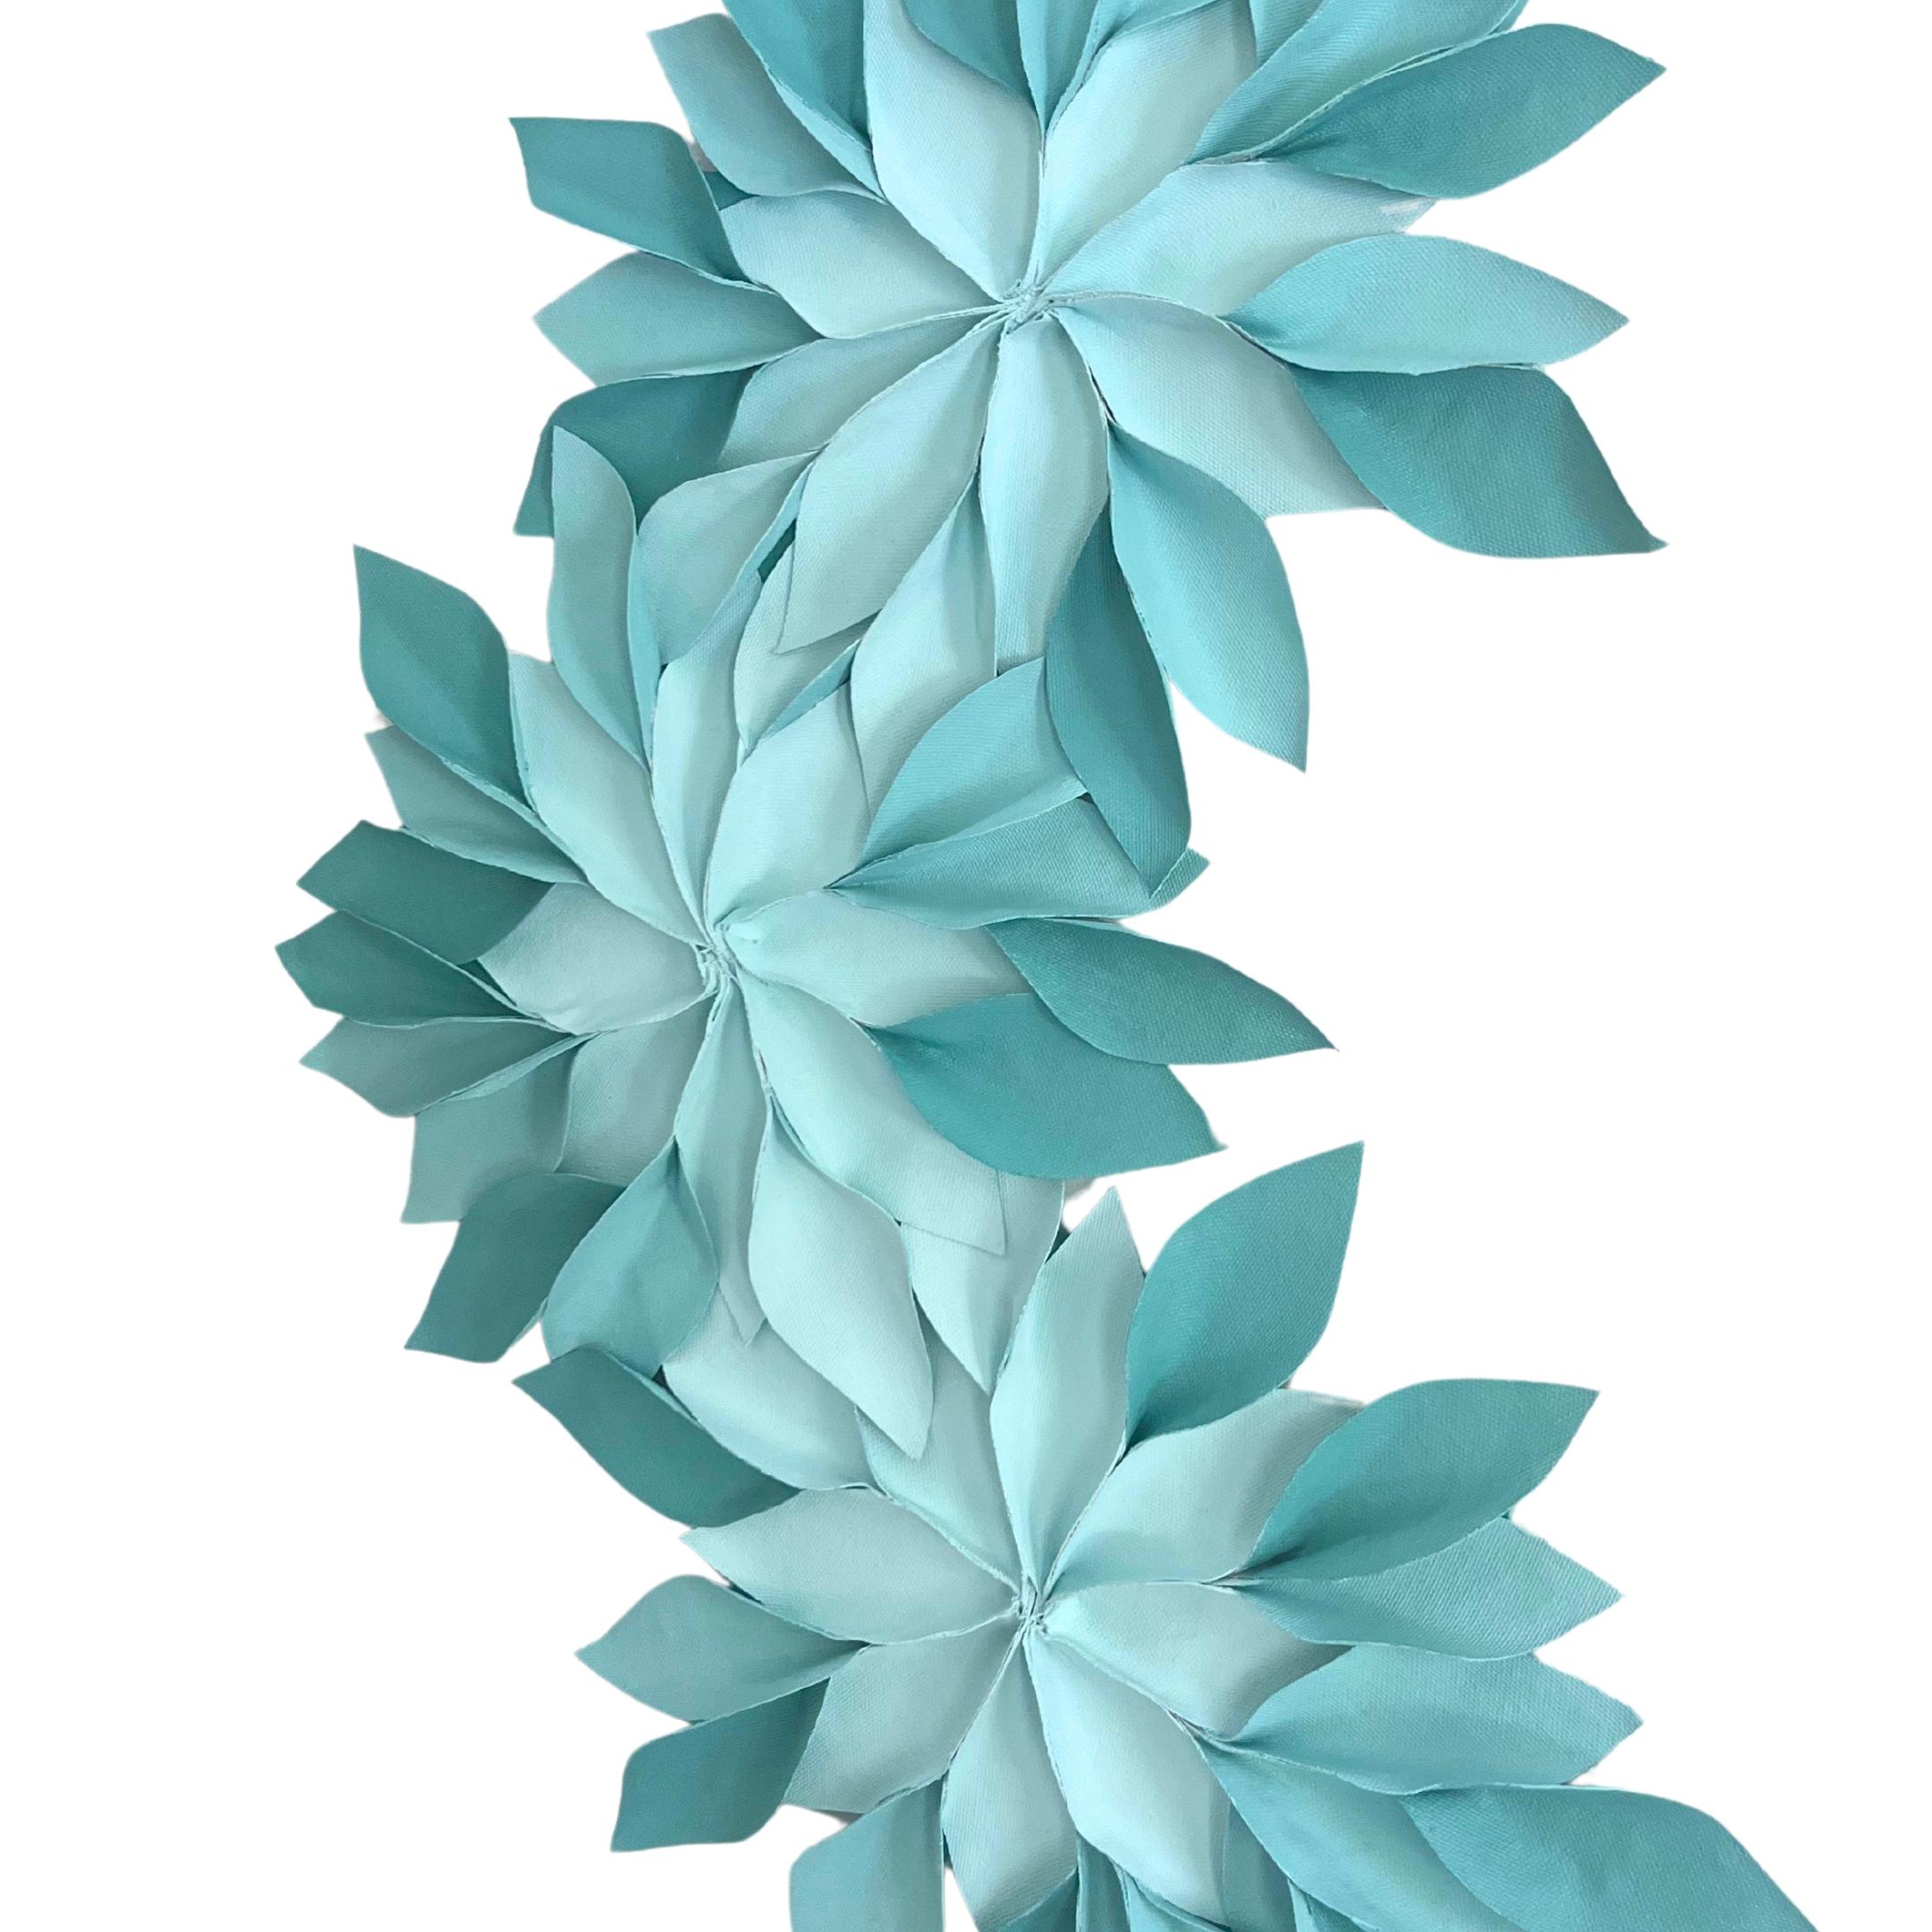 Infused with a tranquil palette, this textile sculpture was crafted to evoke serenity and growth, drawing inspiration from the resilience of nature. Its cerulean hues and wood foundation marry the organic with the tactile, creating a ready-made wall